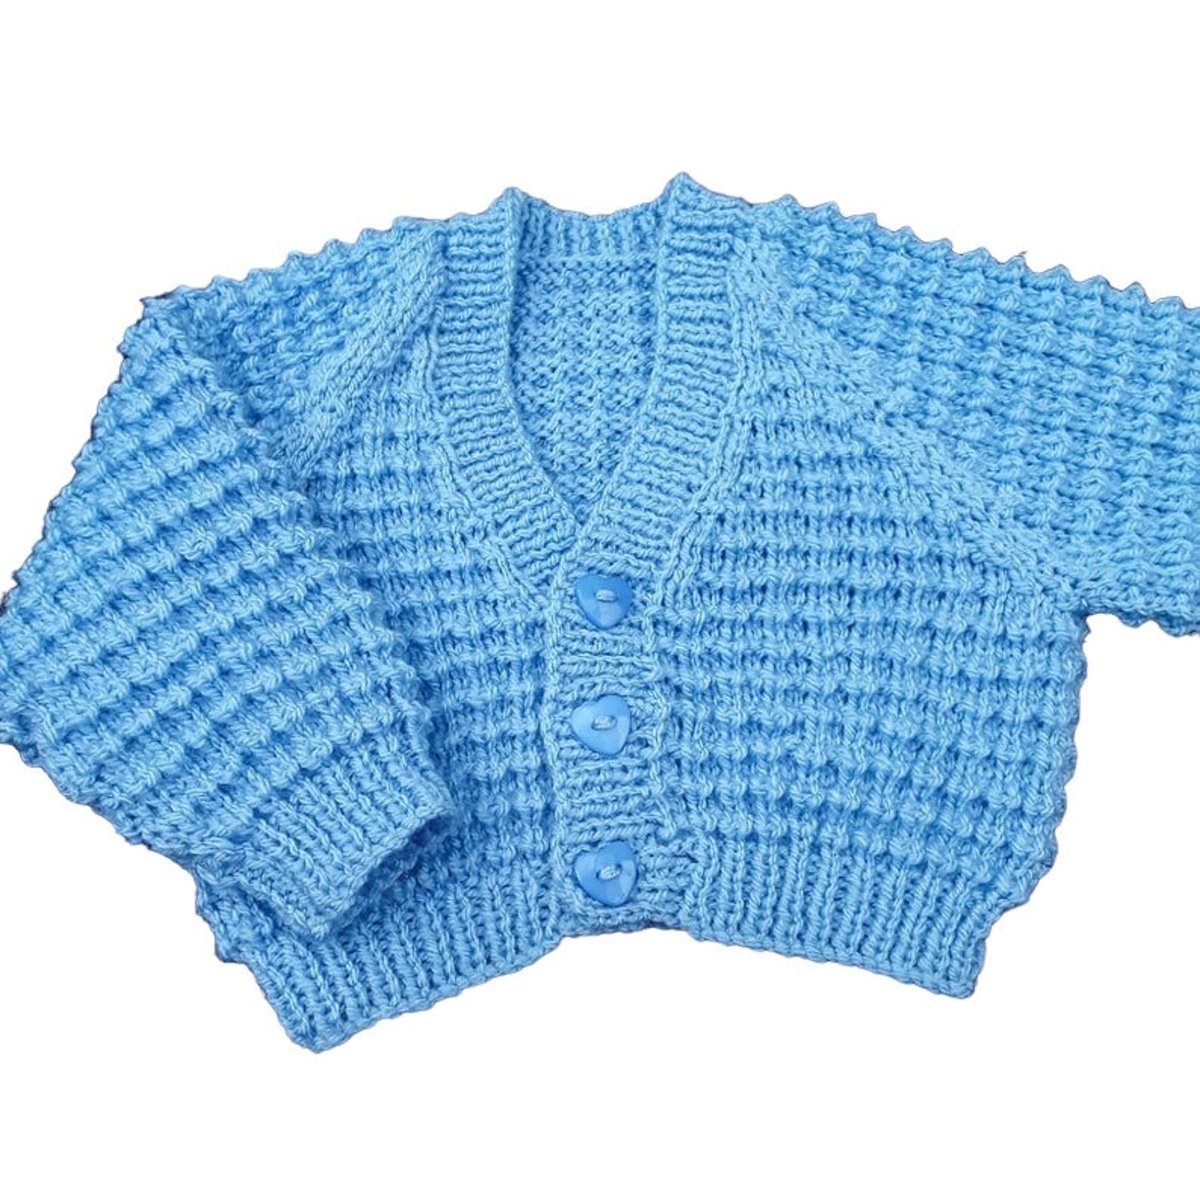 #MHHSBD 

𝗛𝗮𝗻𝗱 𝗸𝗻𝗶𝘁𝘁𝗲𝗱 𝗕𝗮𝗯𝘆 𝗖𝗮𝗿𝗱𝗶𝗴𝗮𝗻 

Hand-knitted Baby Cardigan in gentle baby blue, crafted with love. Features textured pattern and heart-shaped buttons. Fits 16' chest, ideal for 0-3 months. 

knittingtopia.etsy.com/listing/167120…